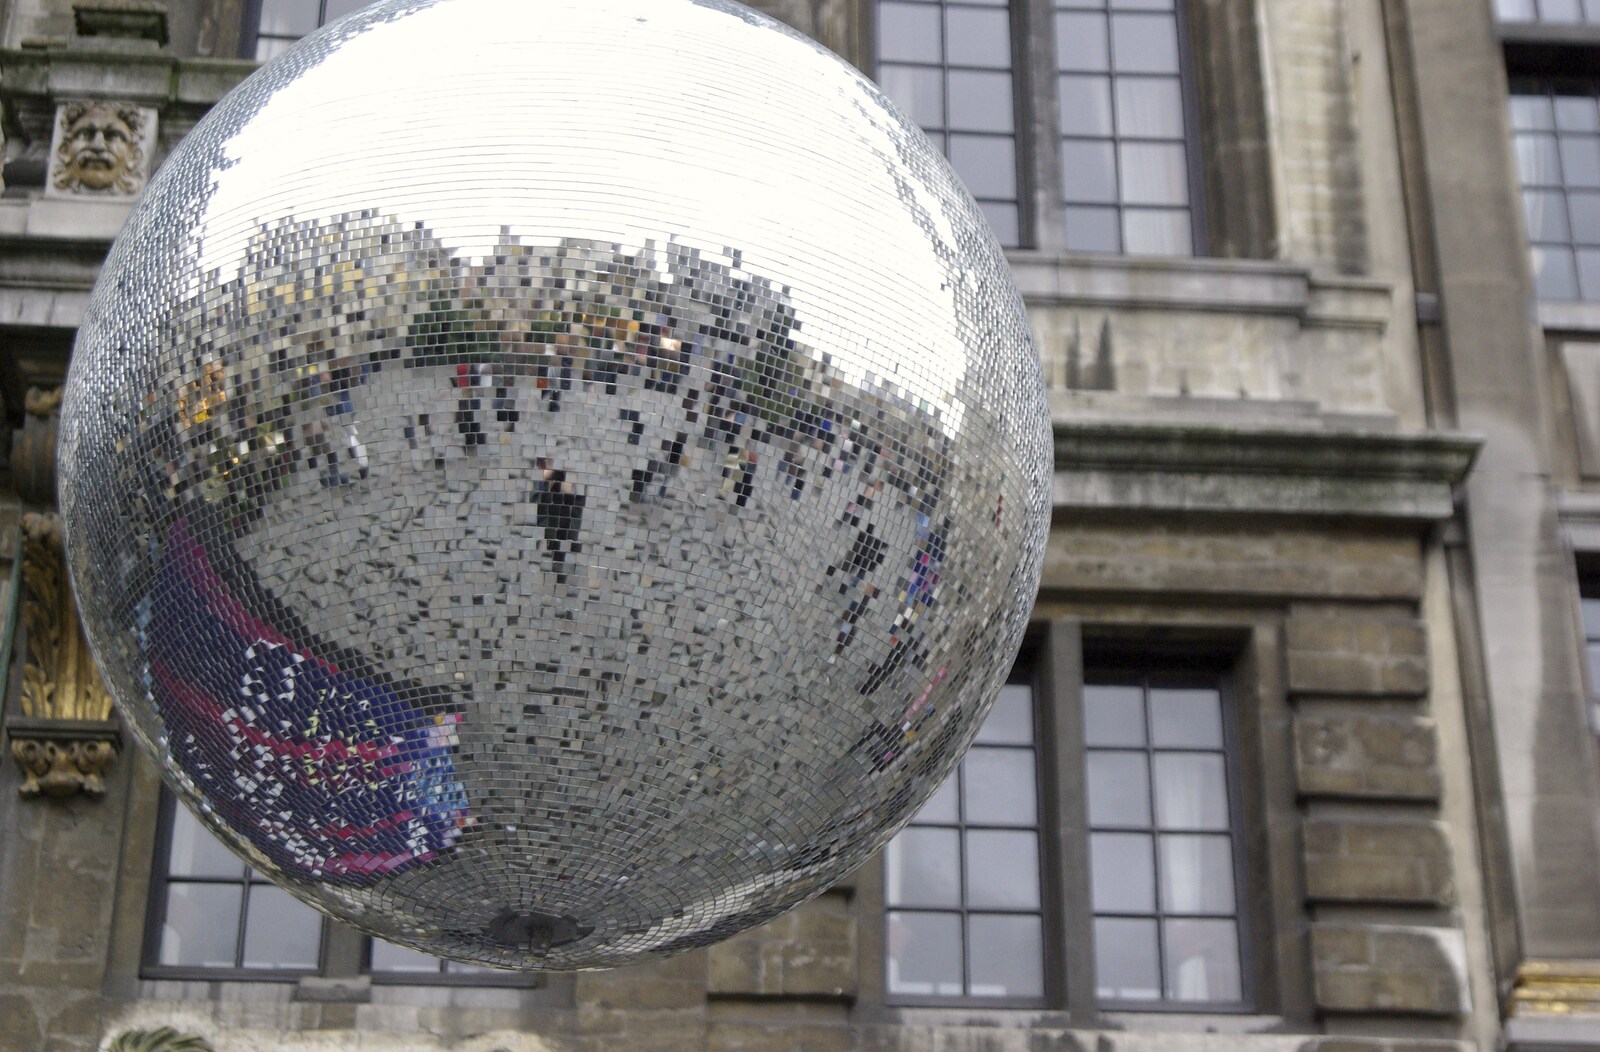 Nosher and the Grand Place in a disco mirror-ball from The Christmas Markets of Brussels, Belgium - 1st January 2007